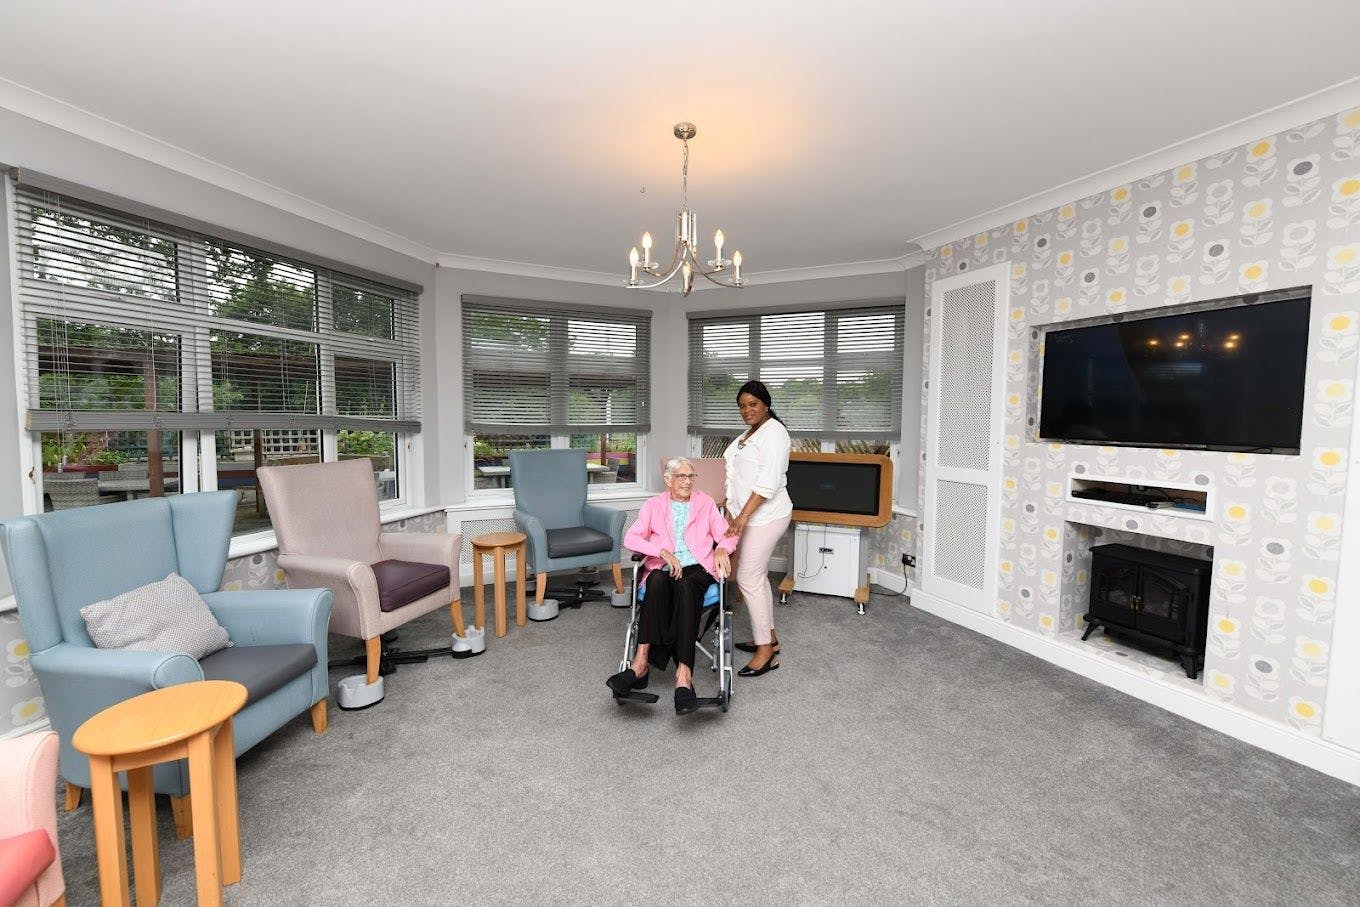 Woodbury Manor care home in Enfield 9